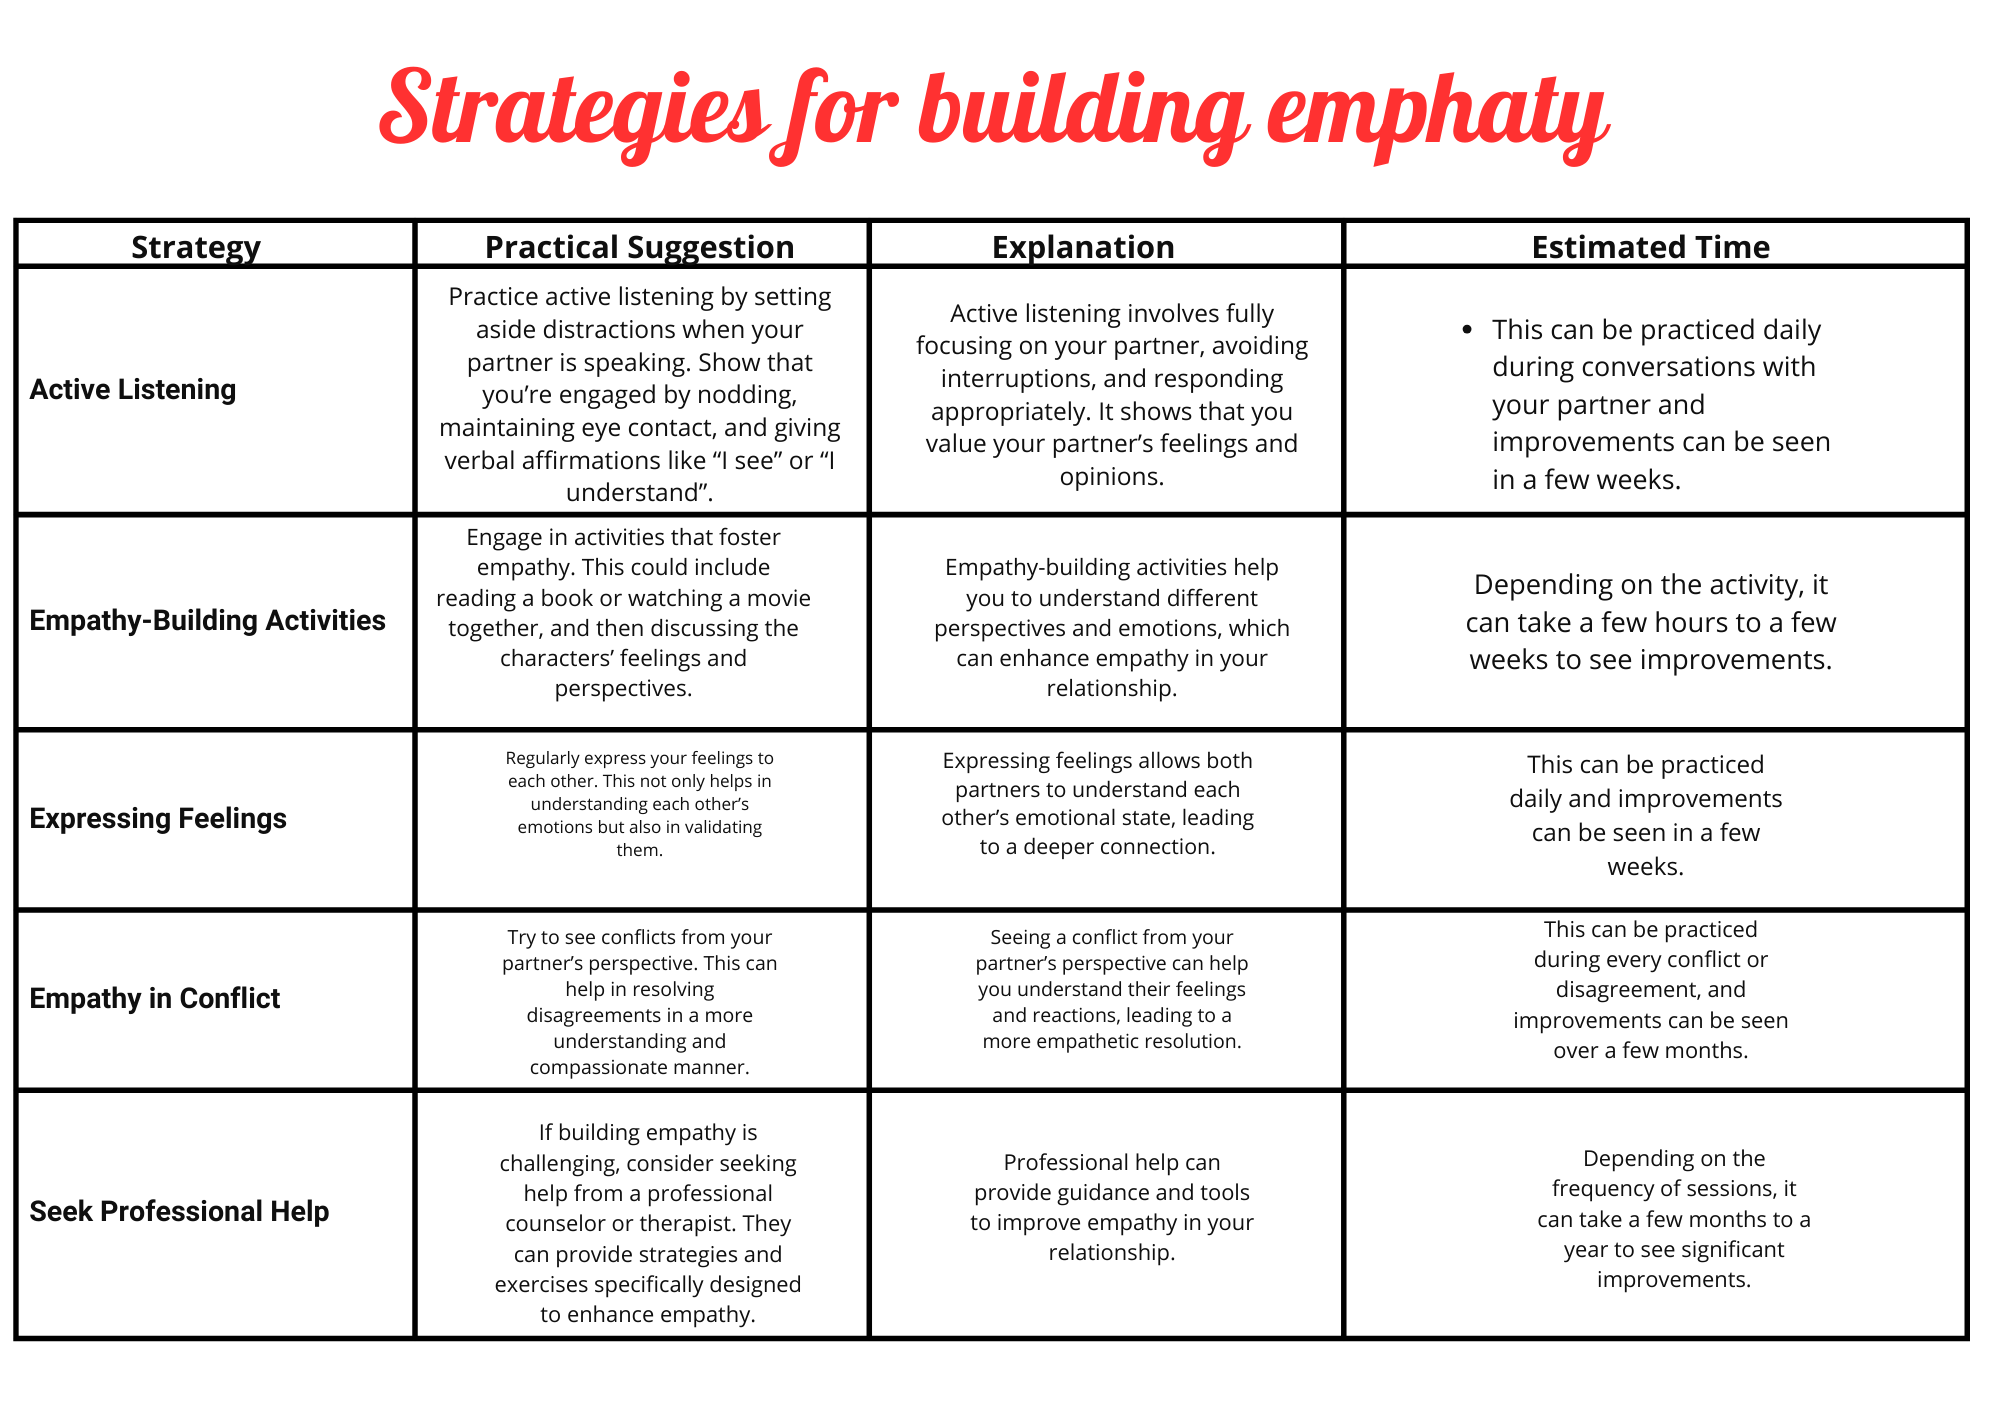 table- strategies for building emphaty